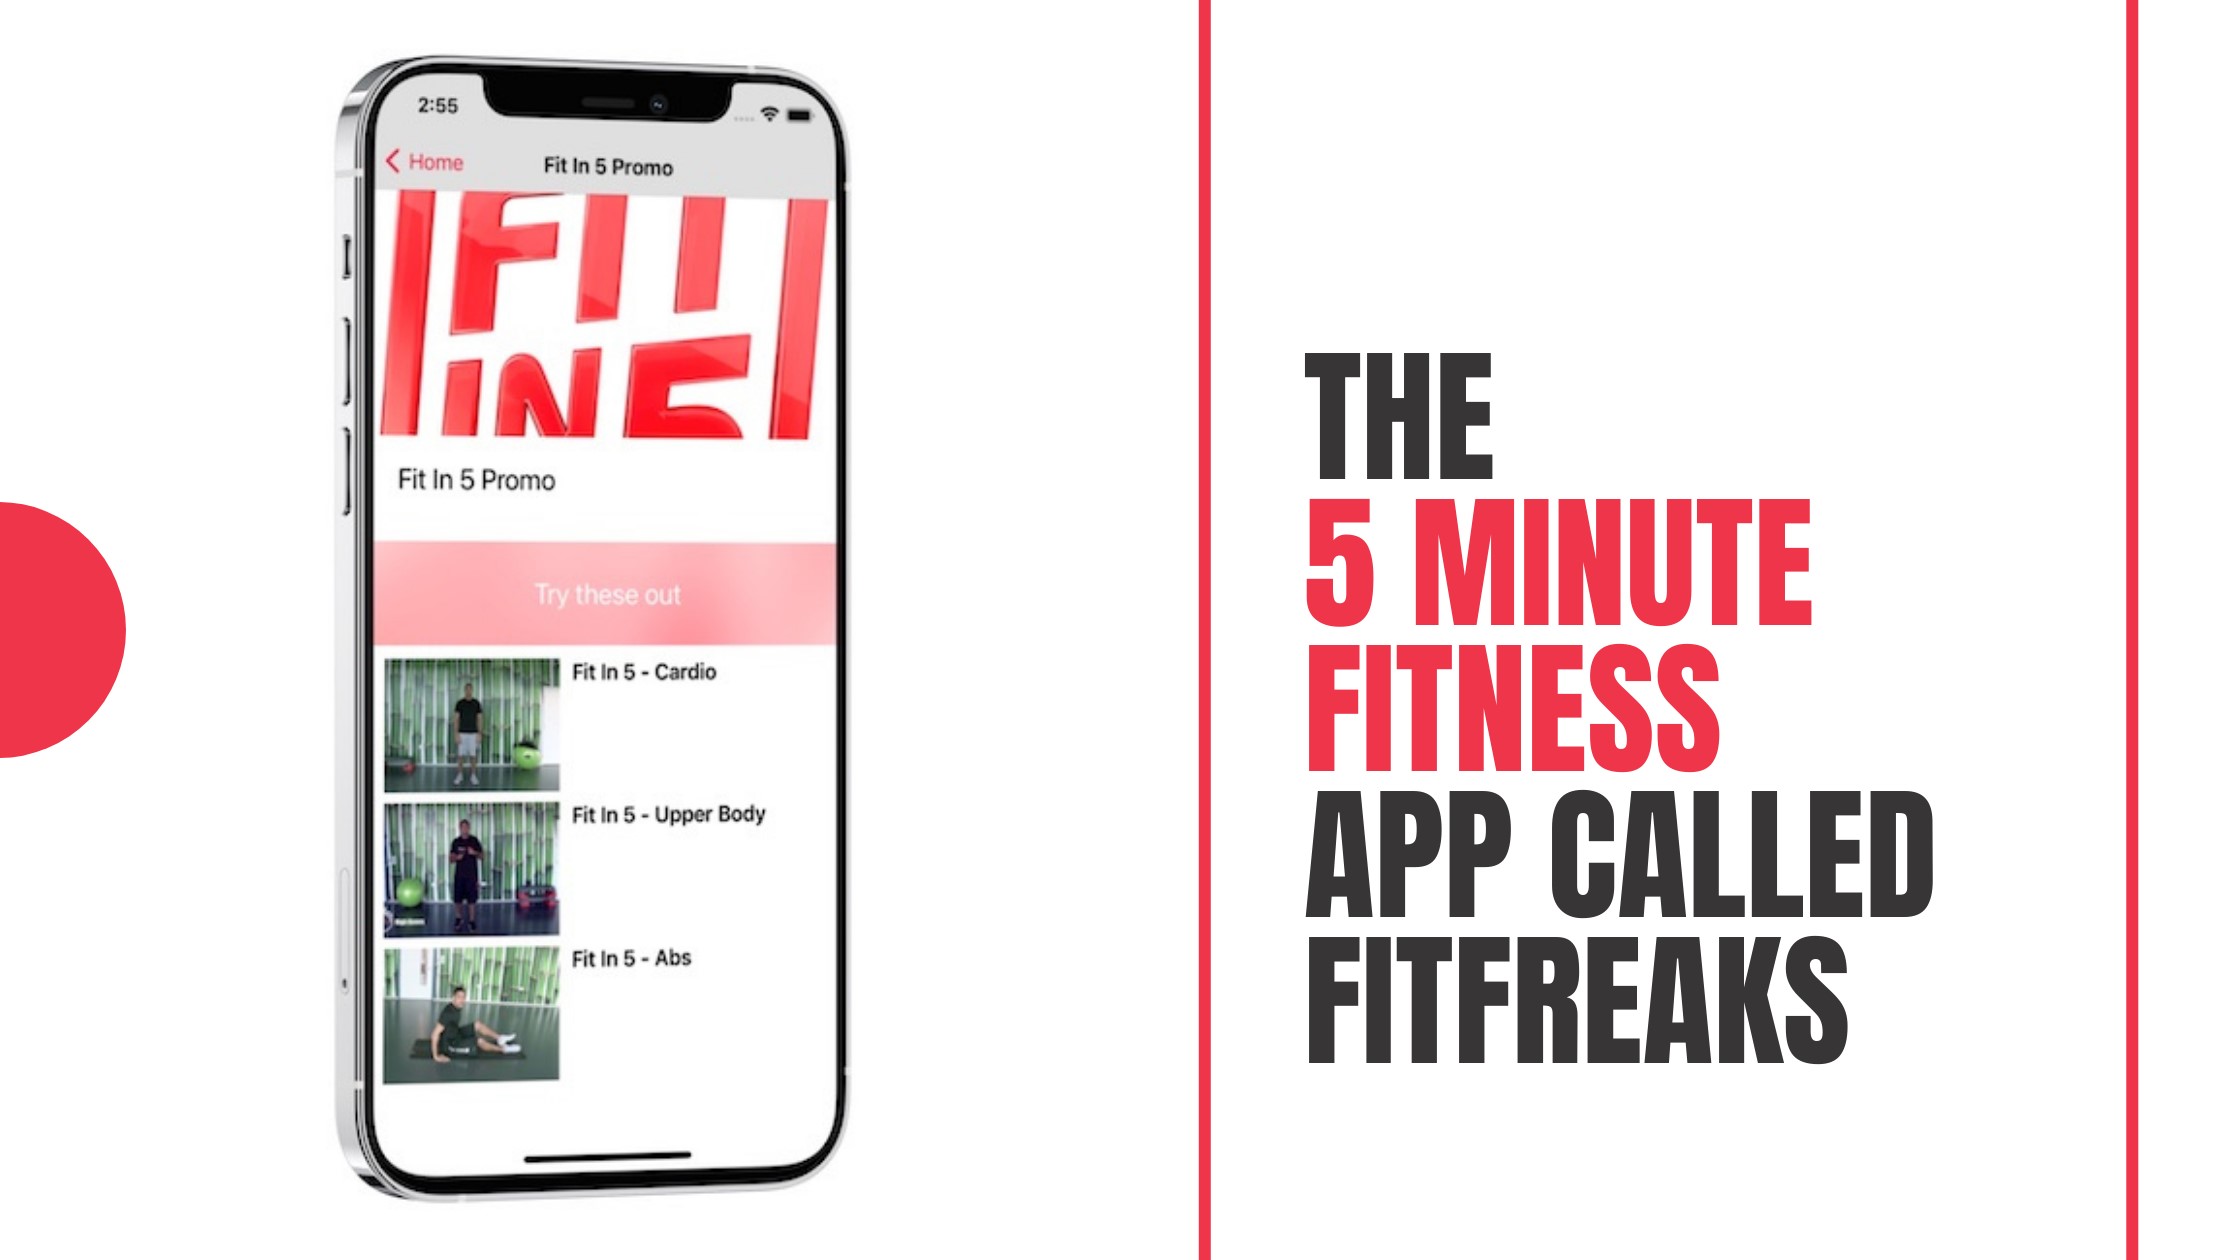 The 5 minute Fitness App Called Fitfreaks